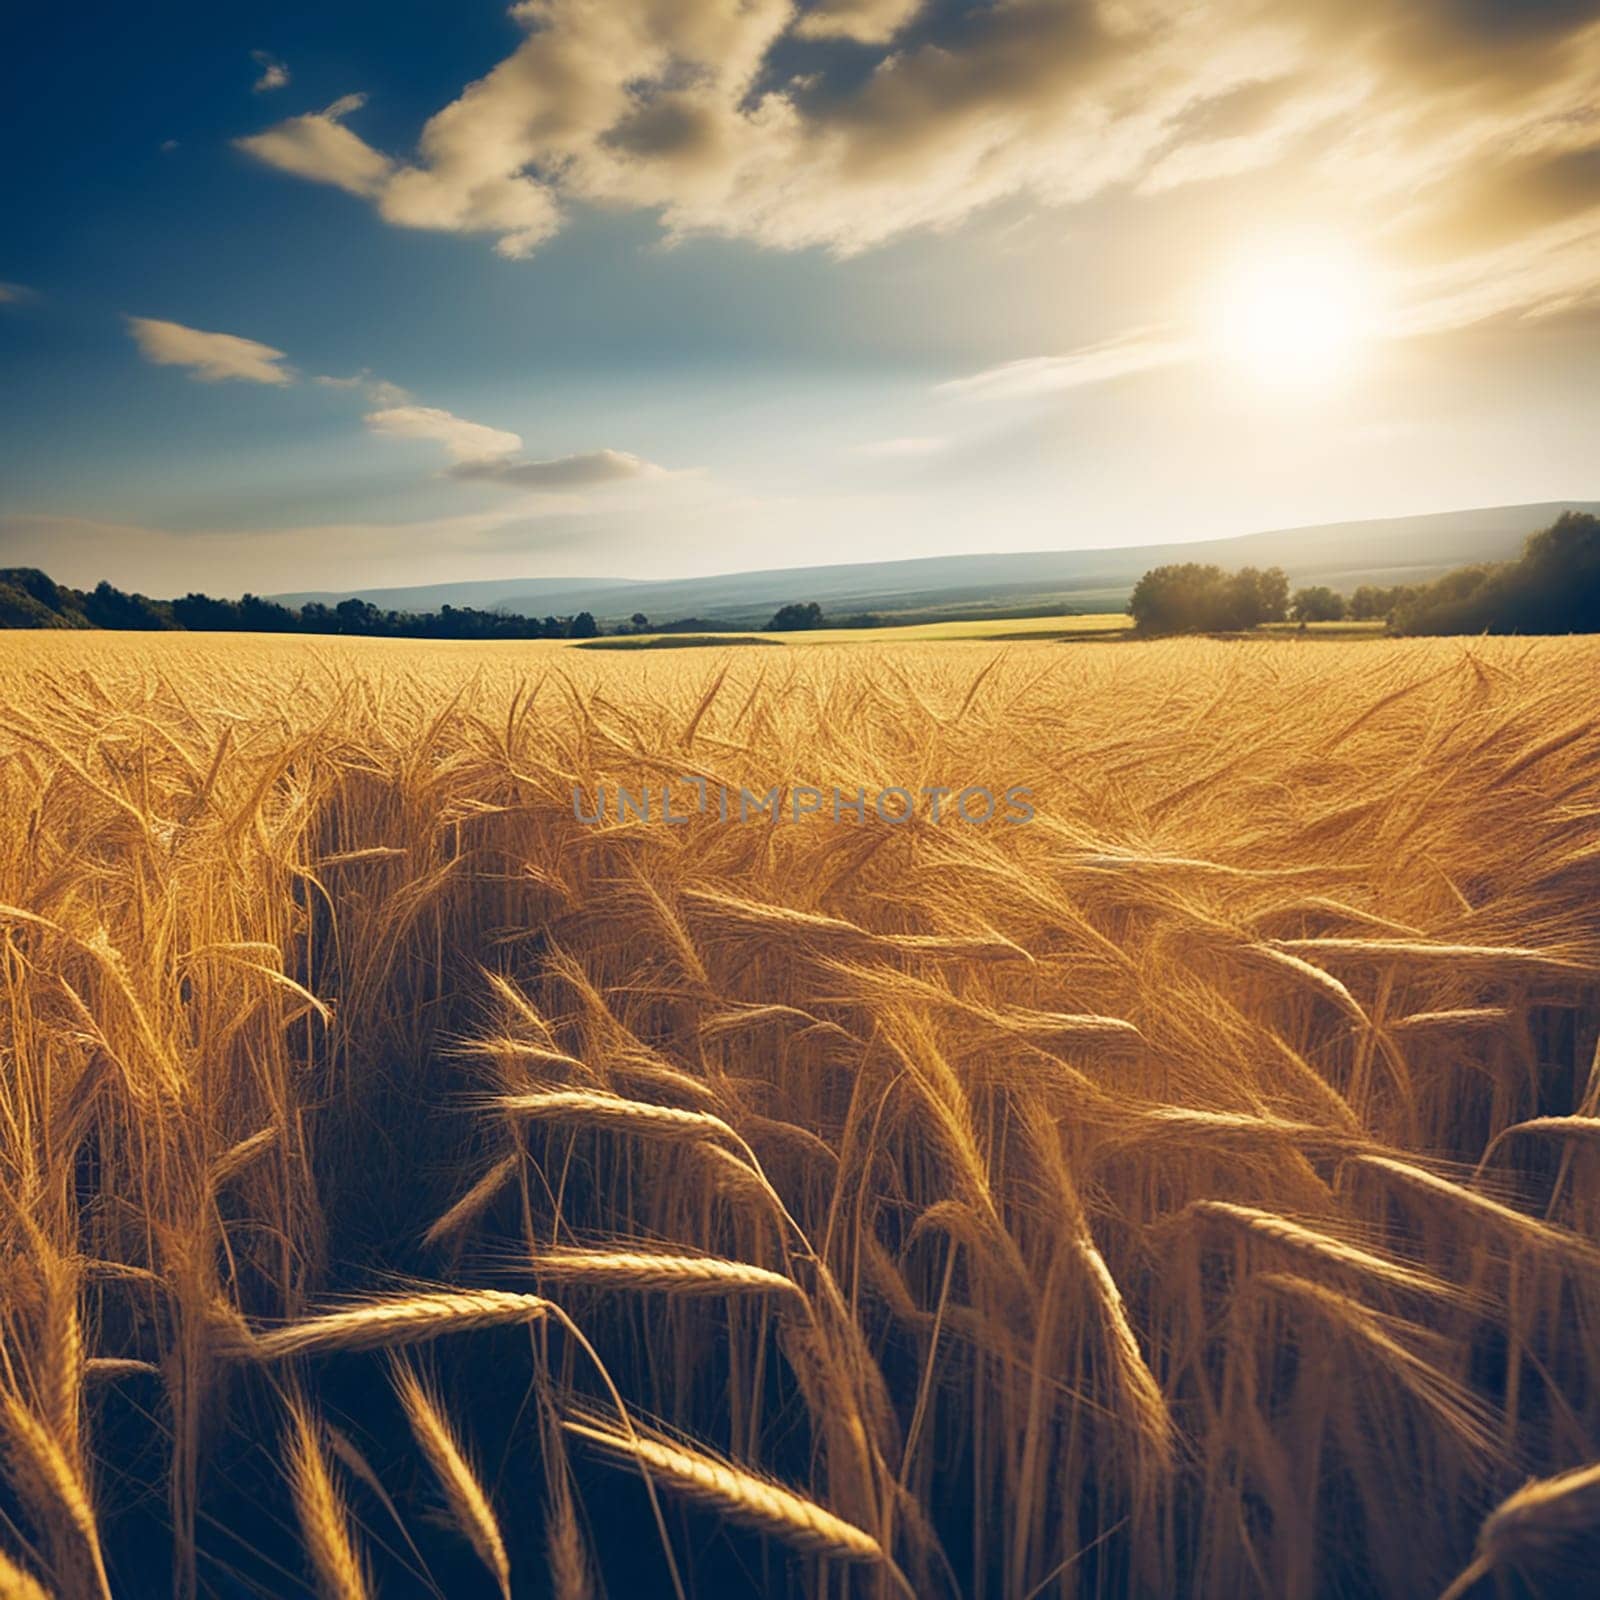 Fields of Gold: A Serene Day in the Wheat Fields